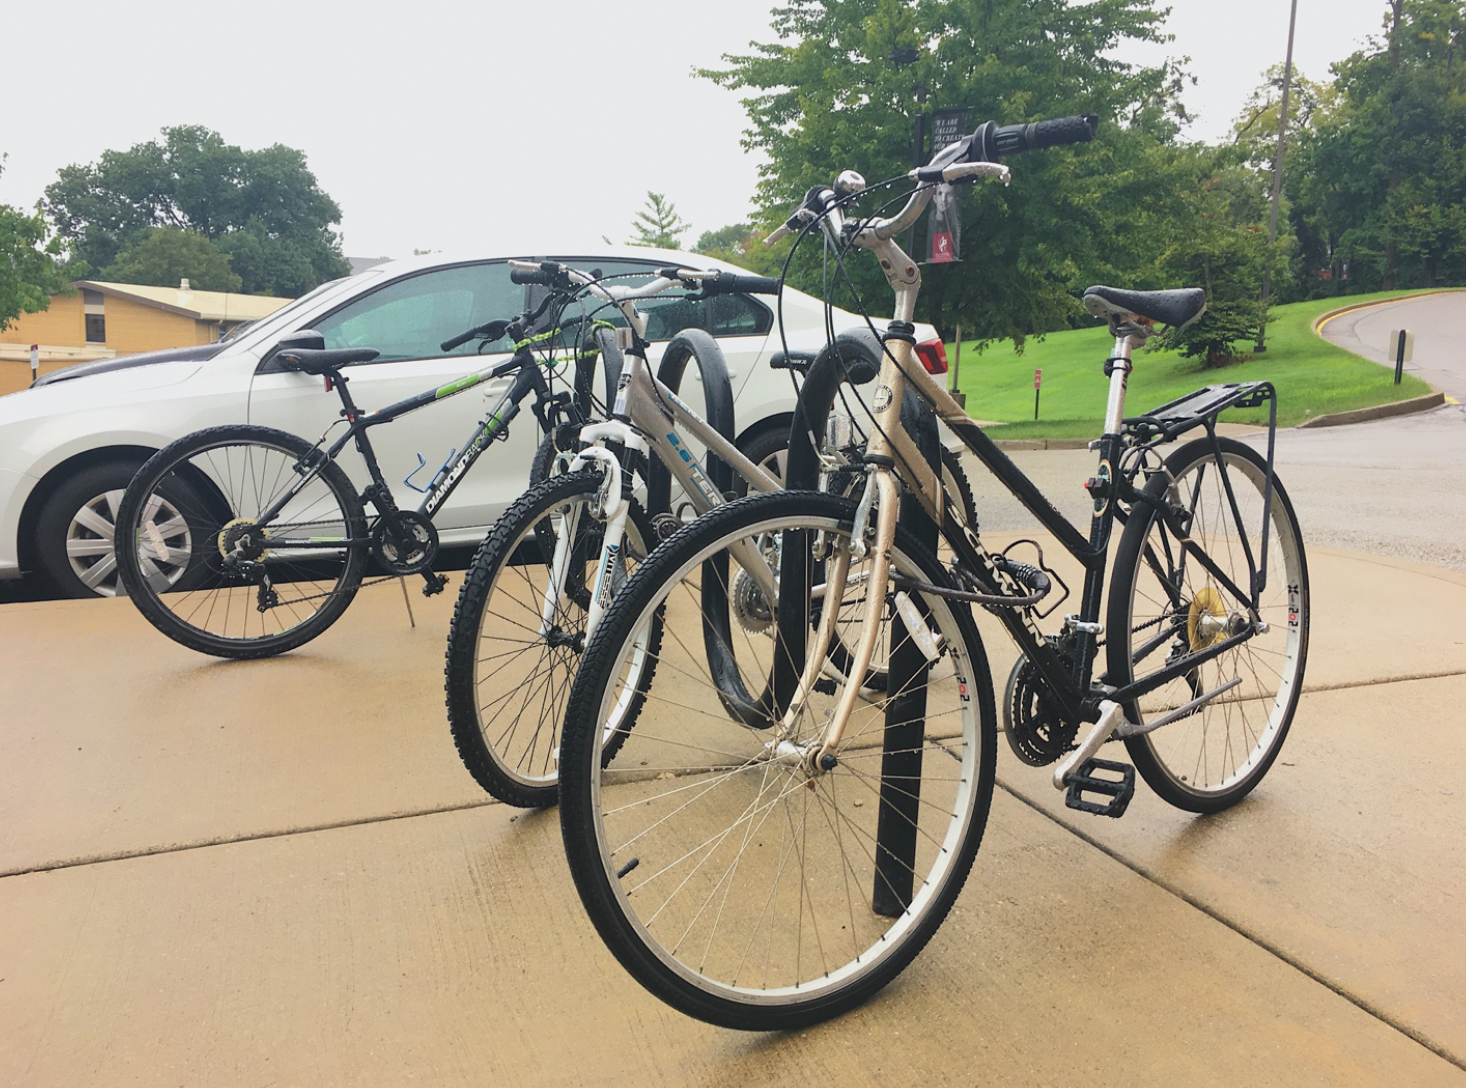 Example of a student photograph depicting bicycles on the university’s campus.